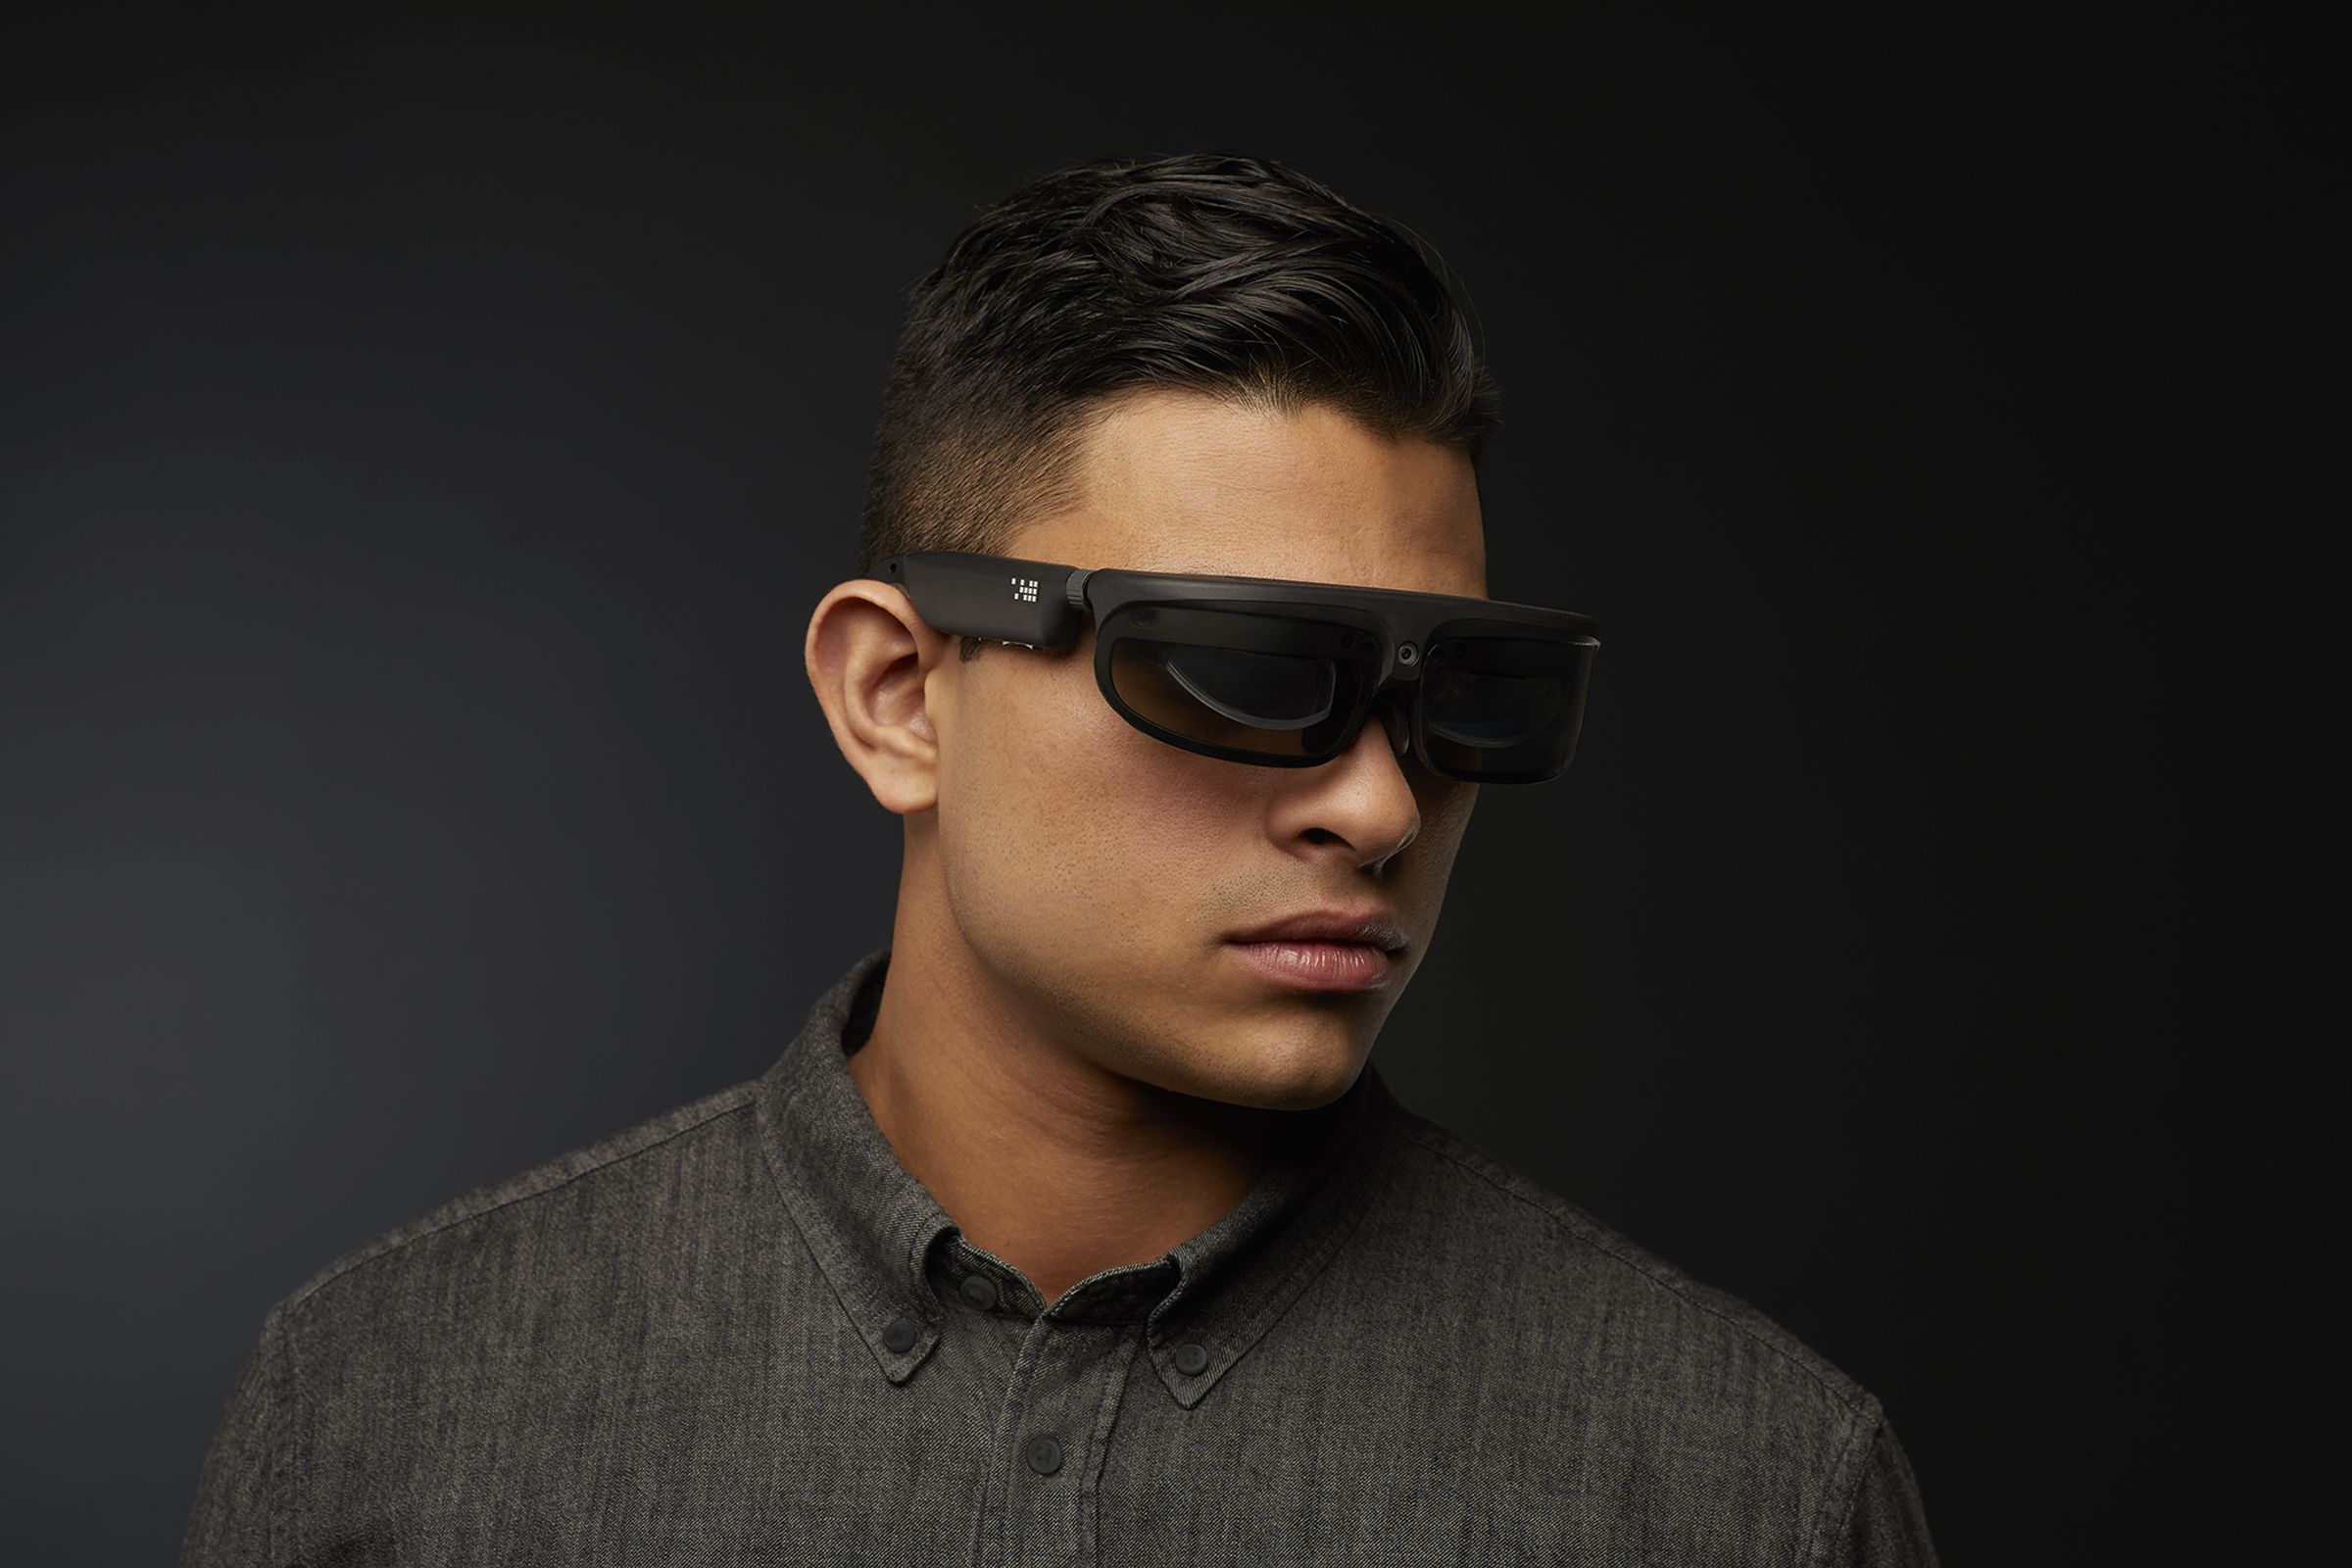 ODG R8 augmented reality glasses